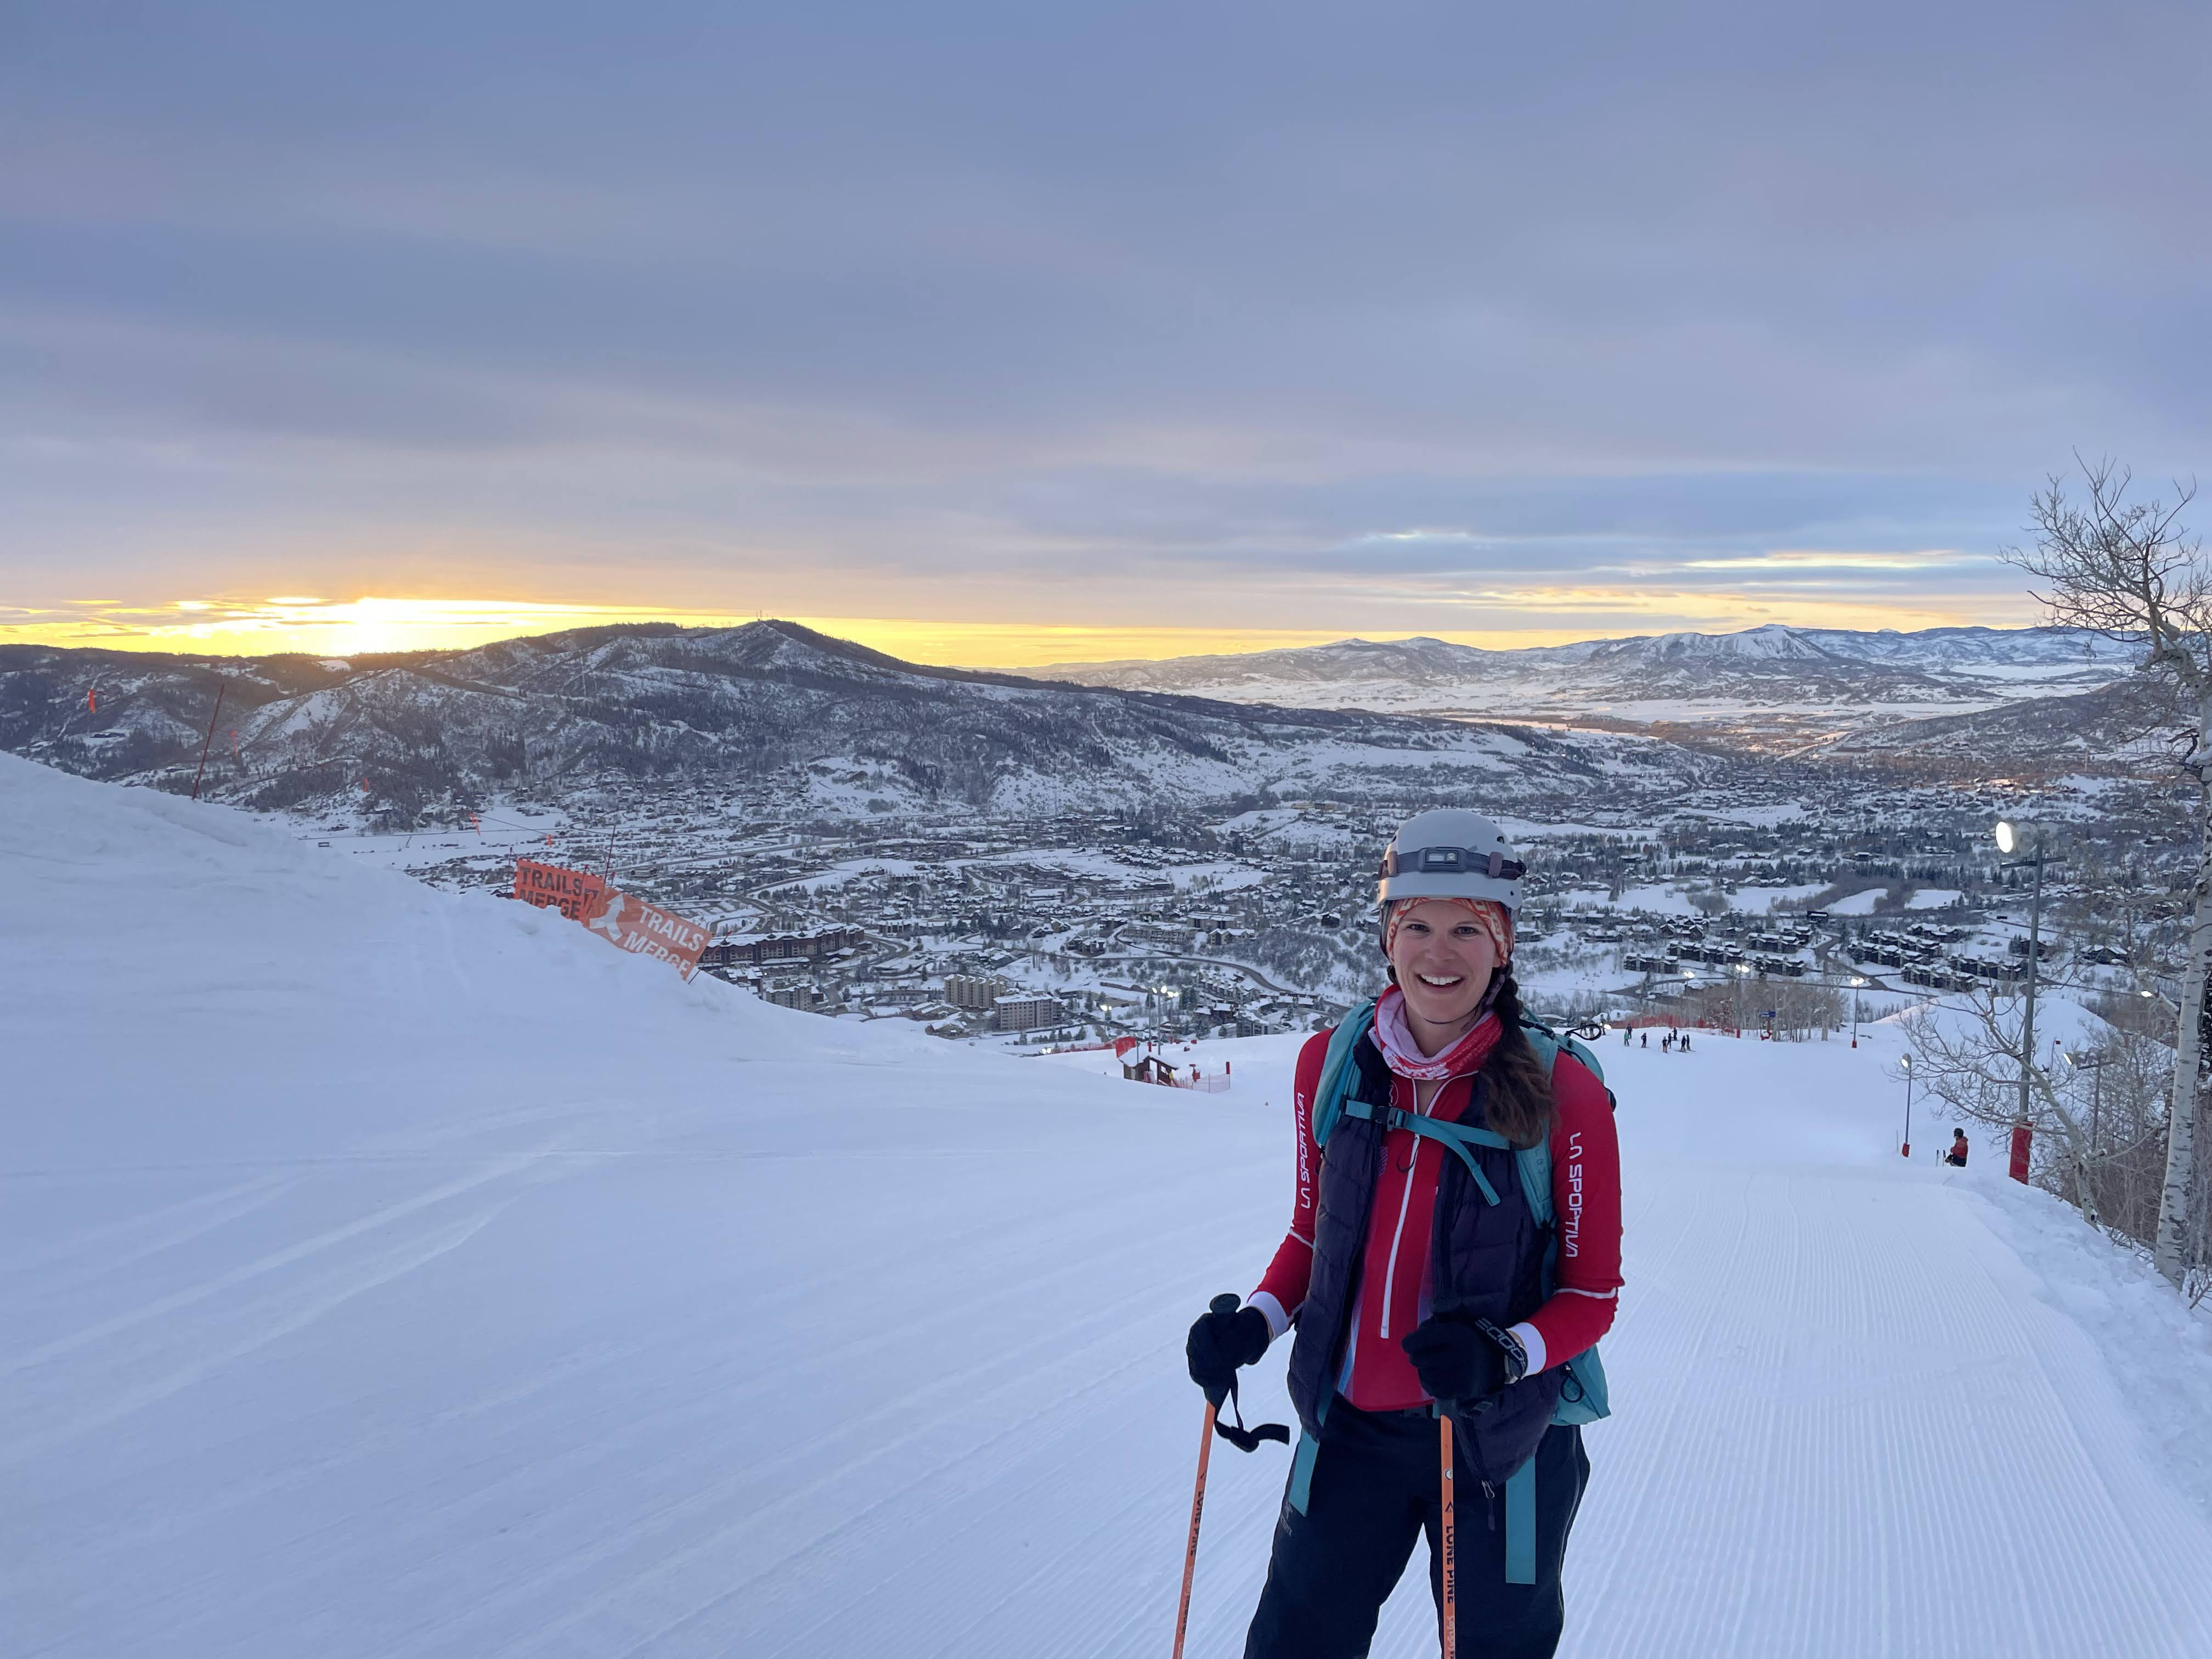 Kathryn skiing uphill at
sunset.